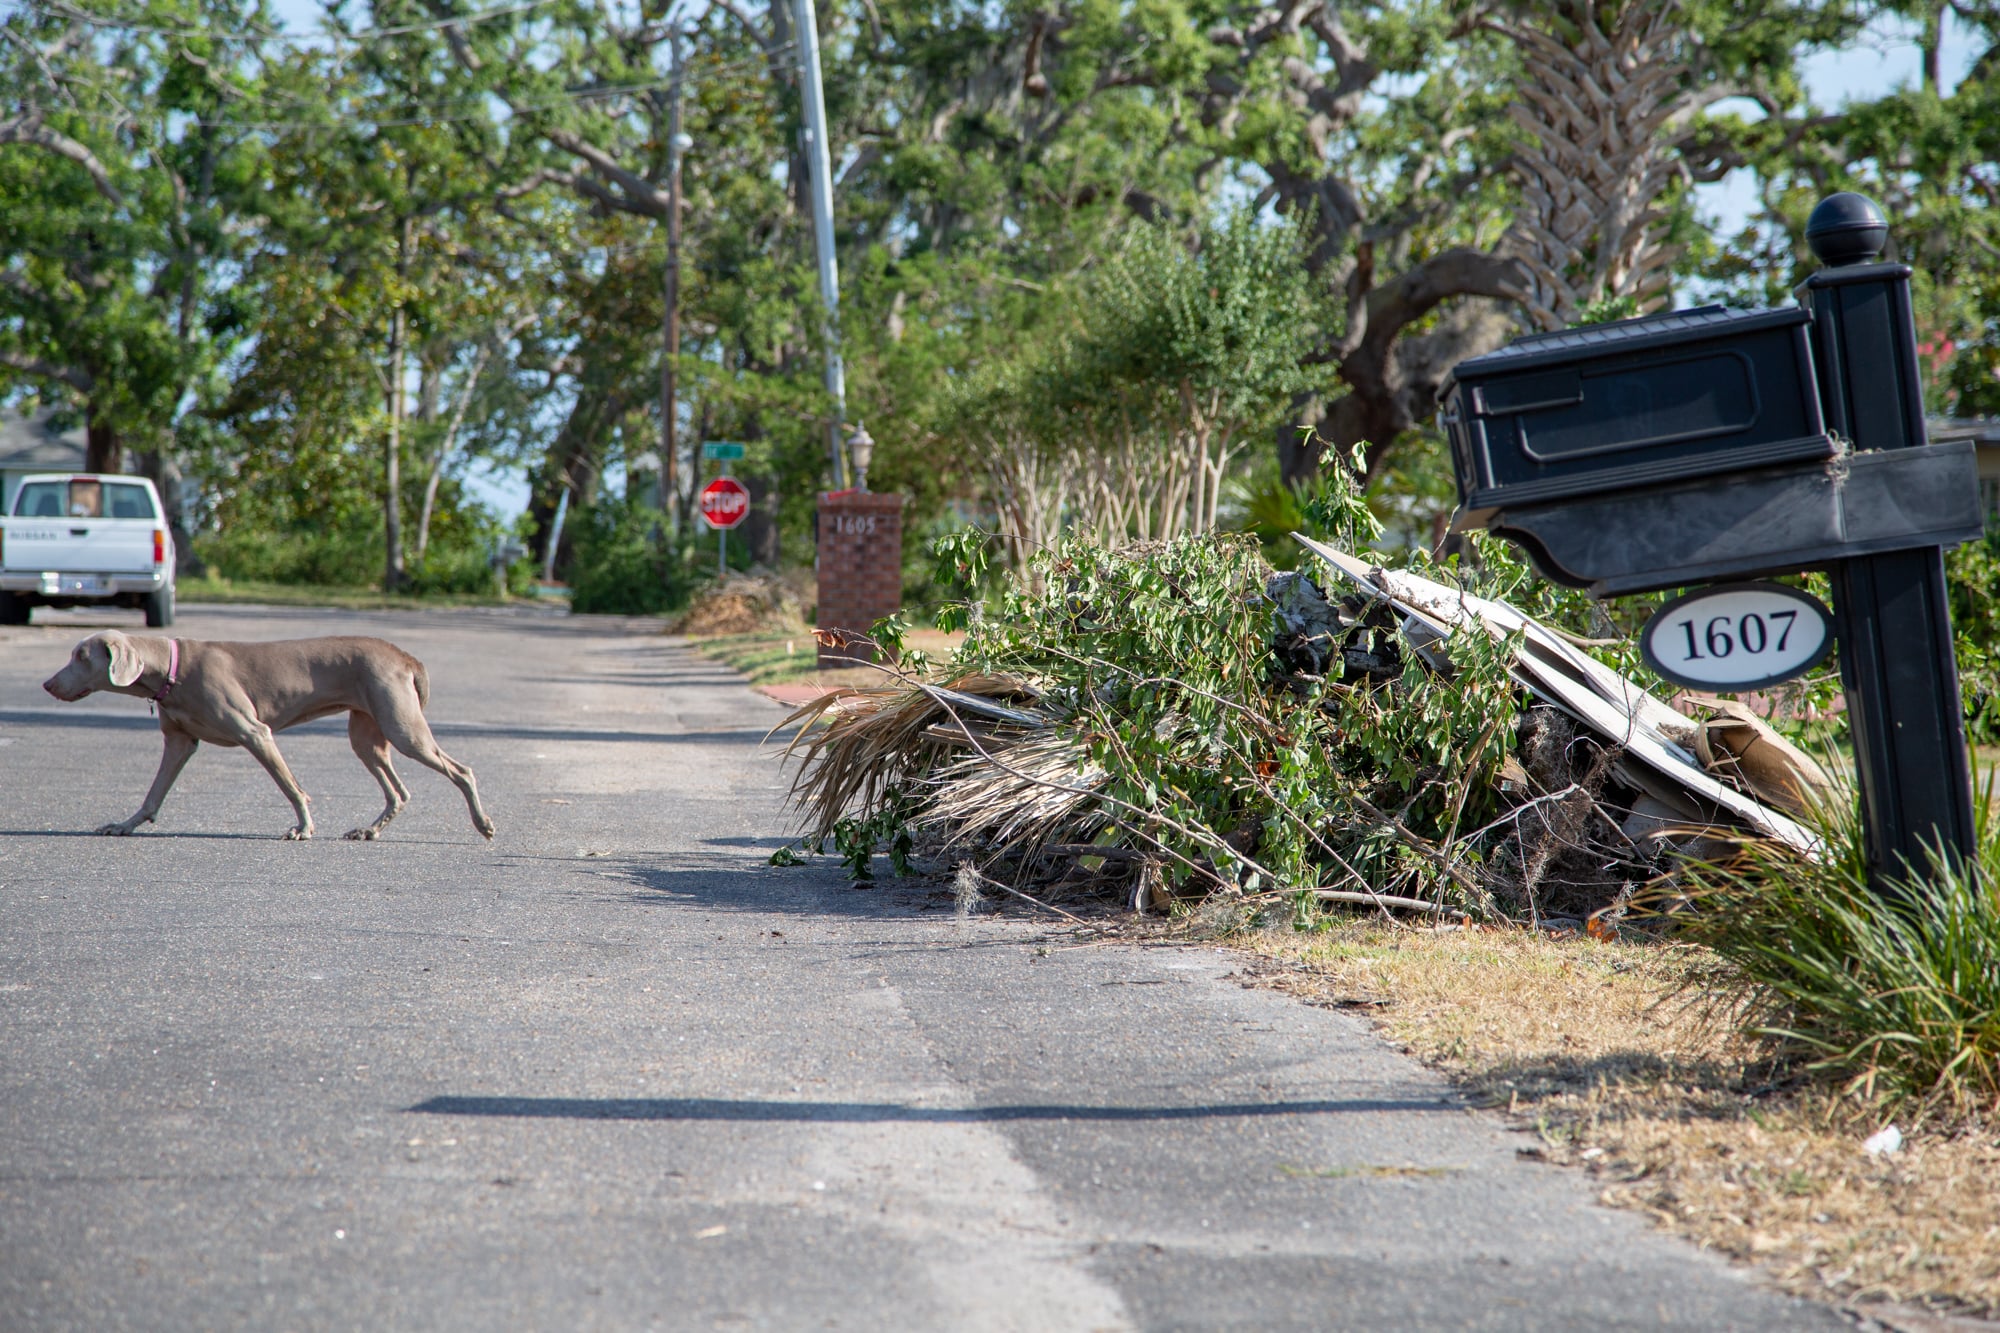 Debris can still be found along the residential streets of Panama City, eight months after Hurricane Michael. (Jake Goodrick/News21)